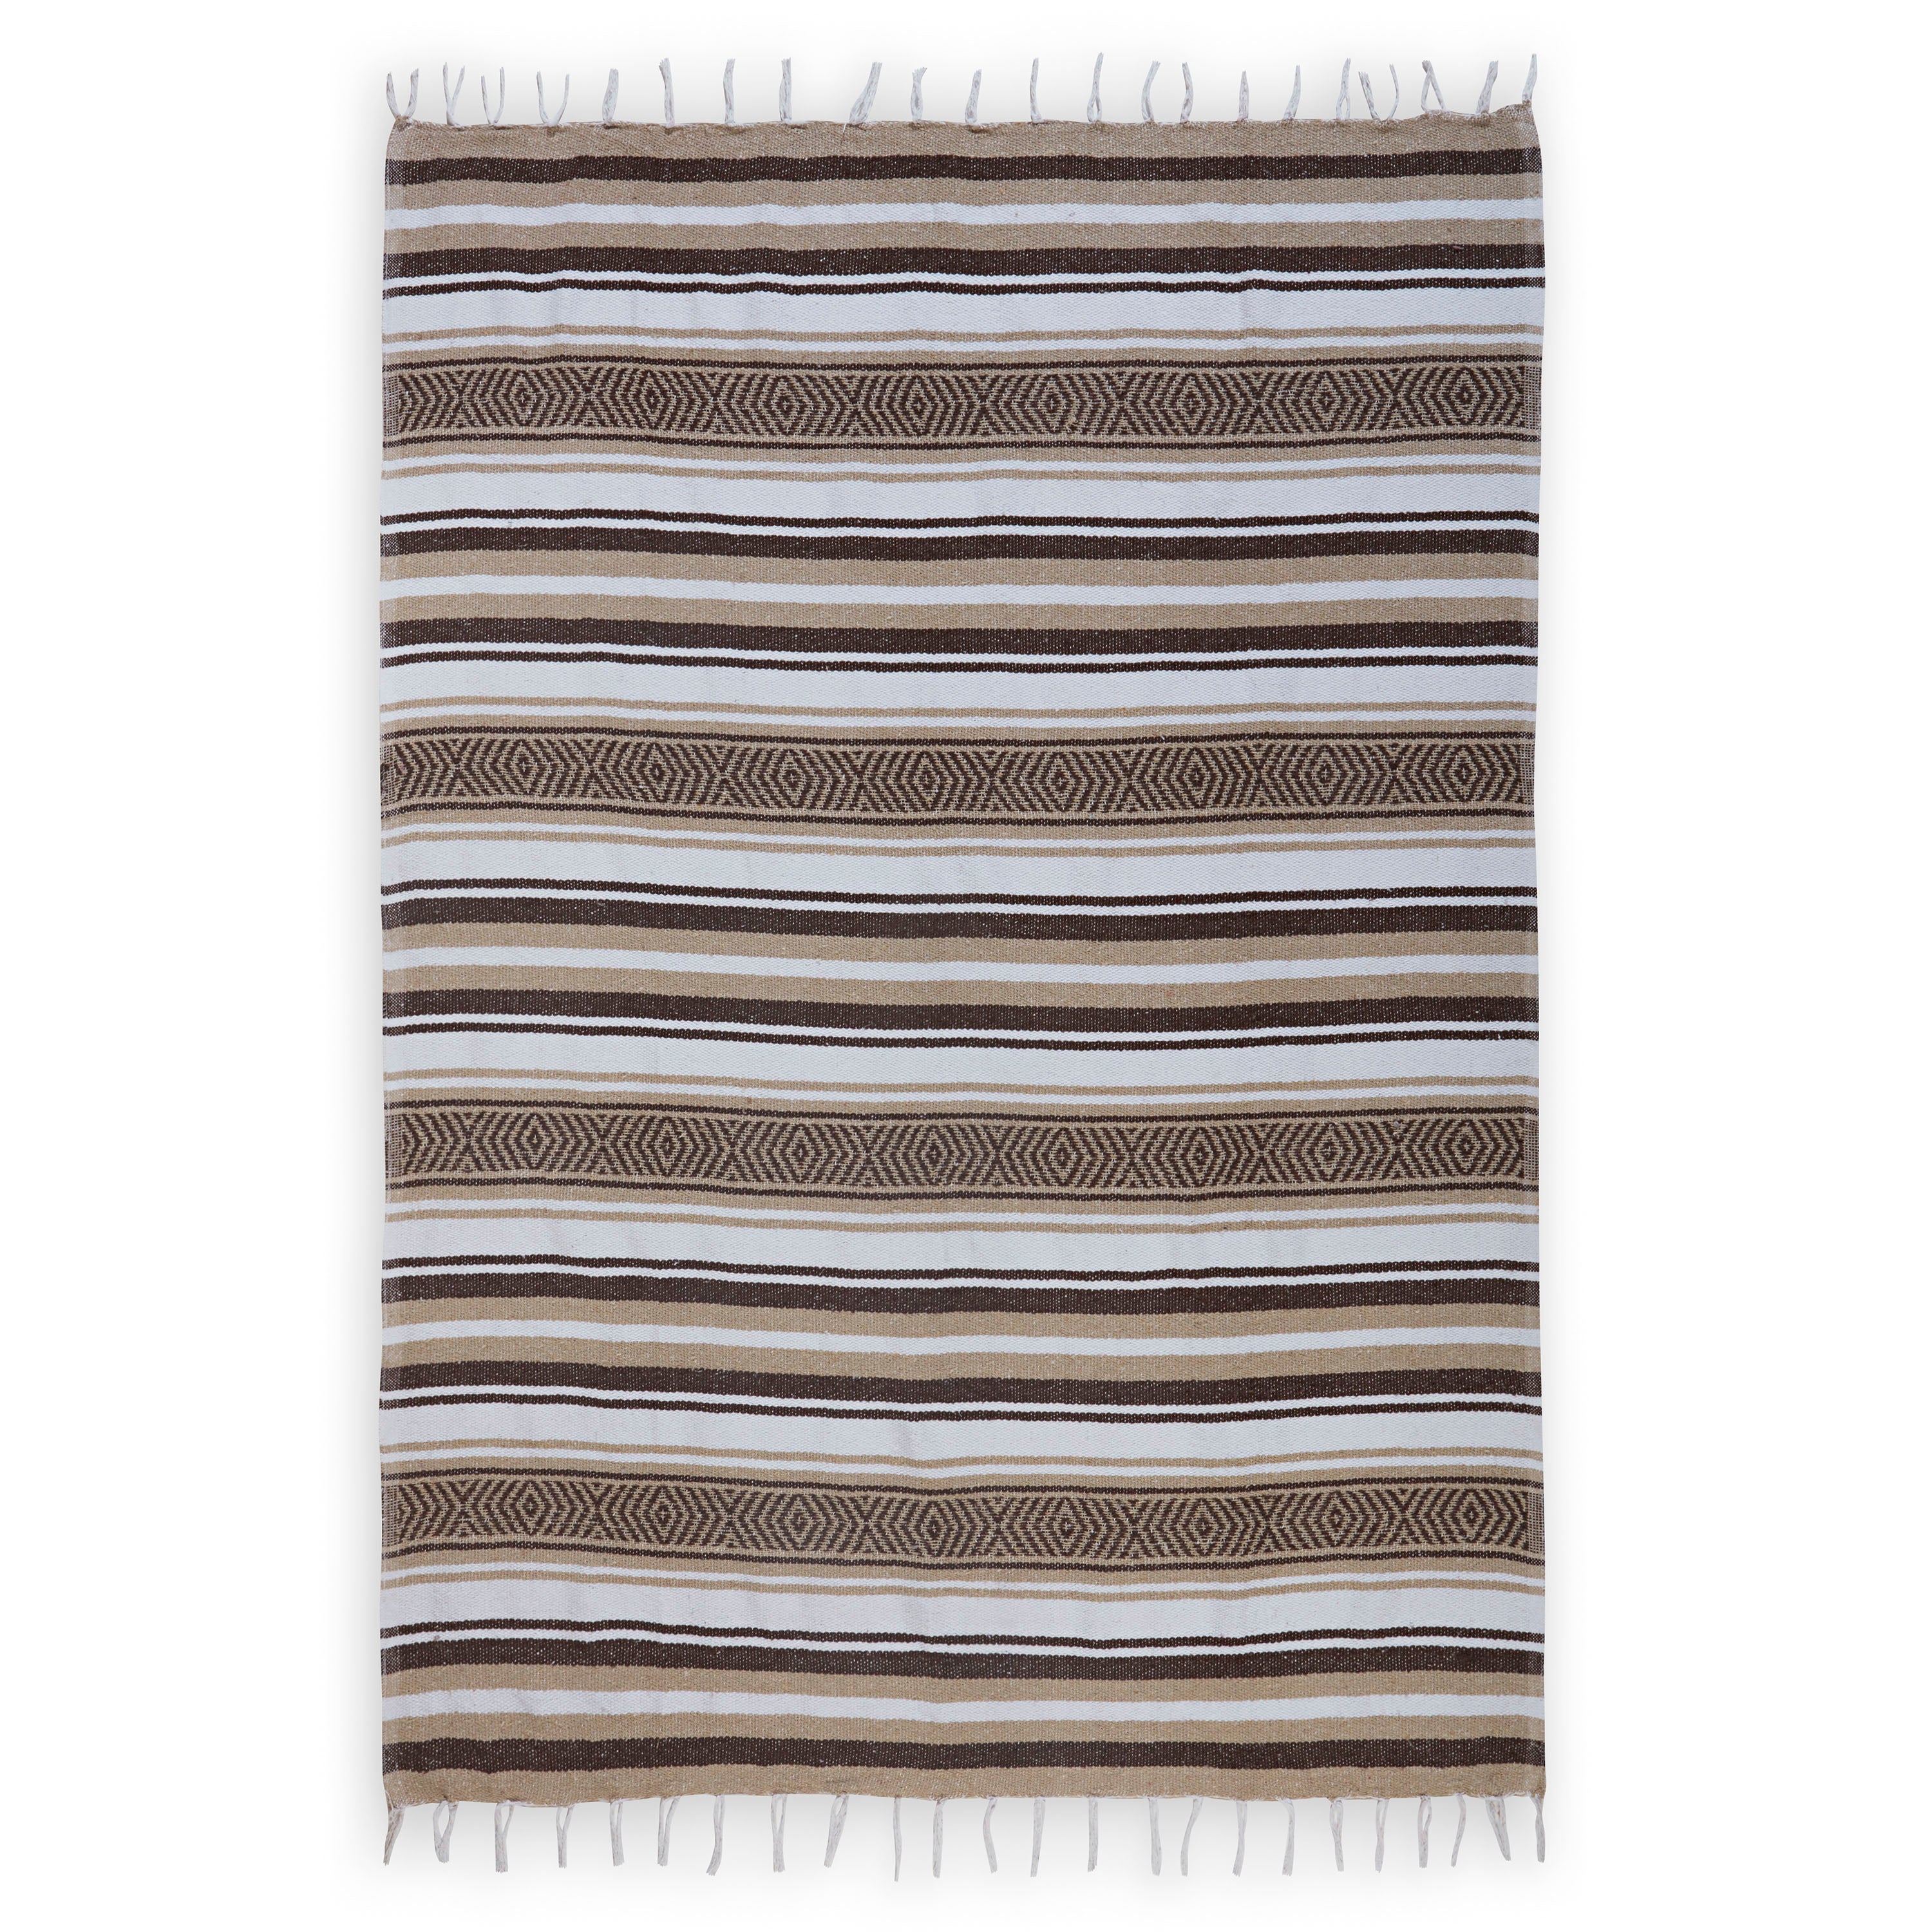 Traditional Mexican Woven Blanket tan brown flat